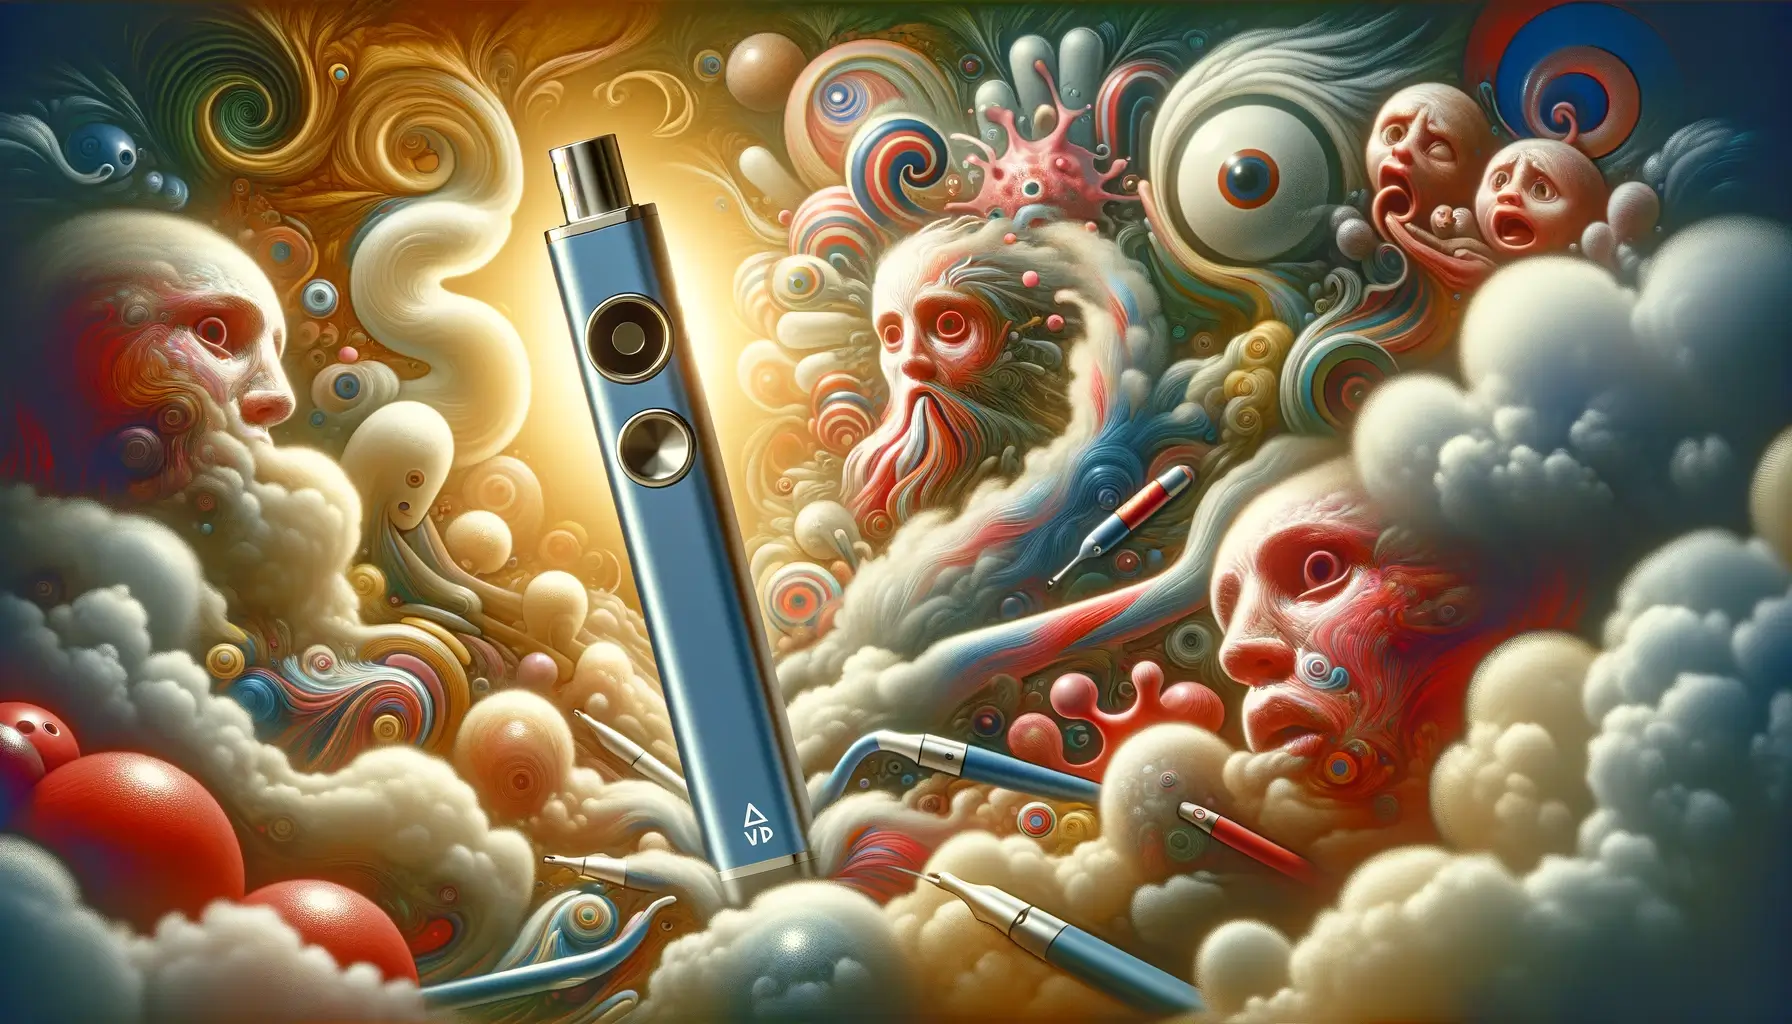 stylized Delta 8 vape pen surrounded by abstract representations of discomfort